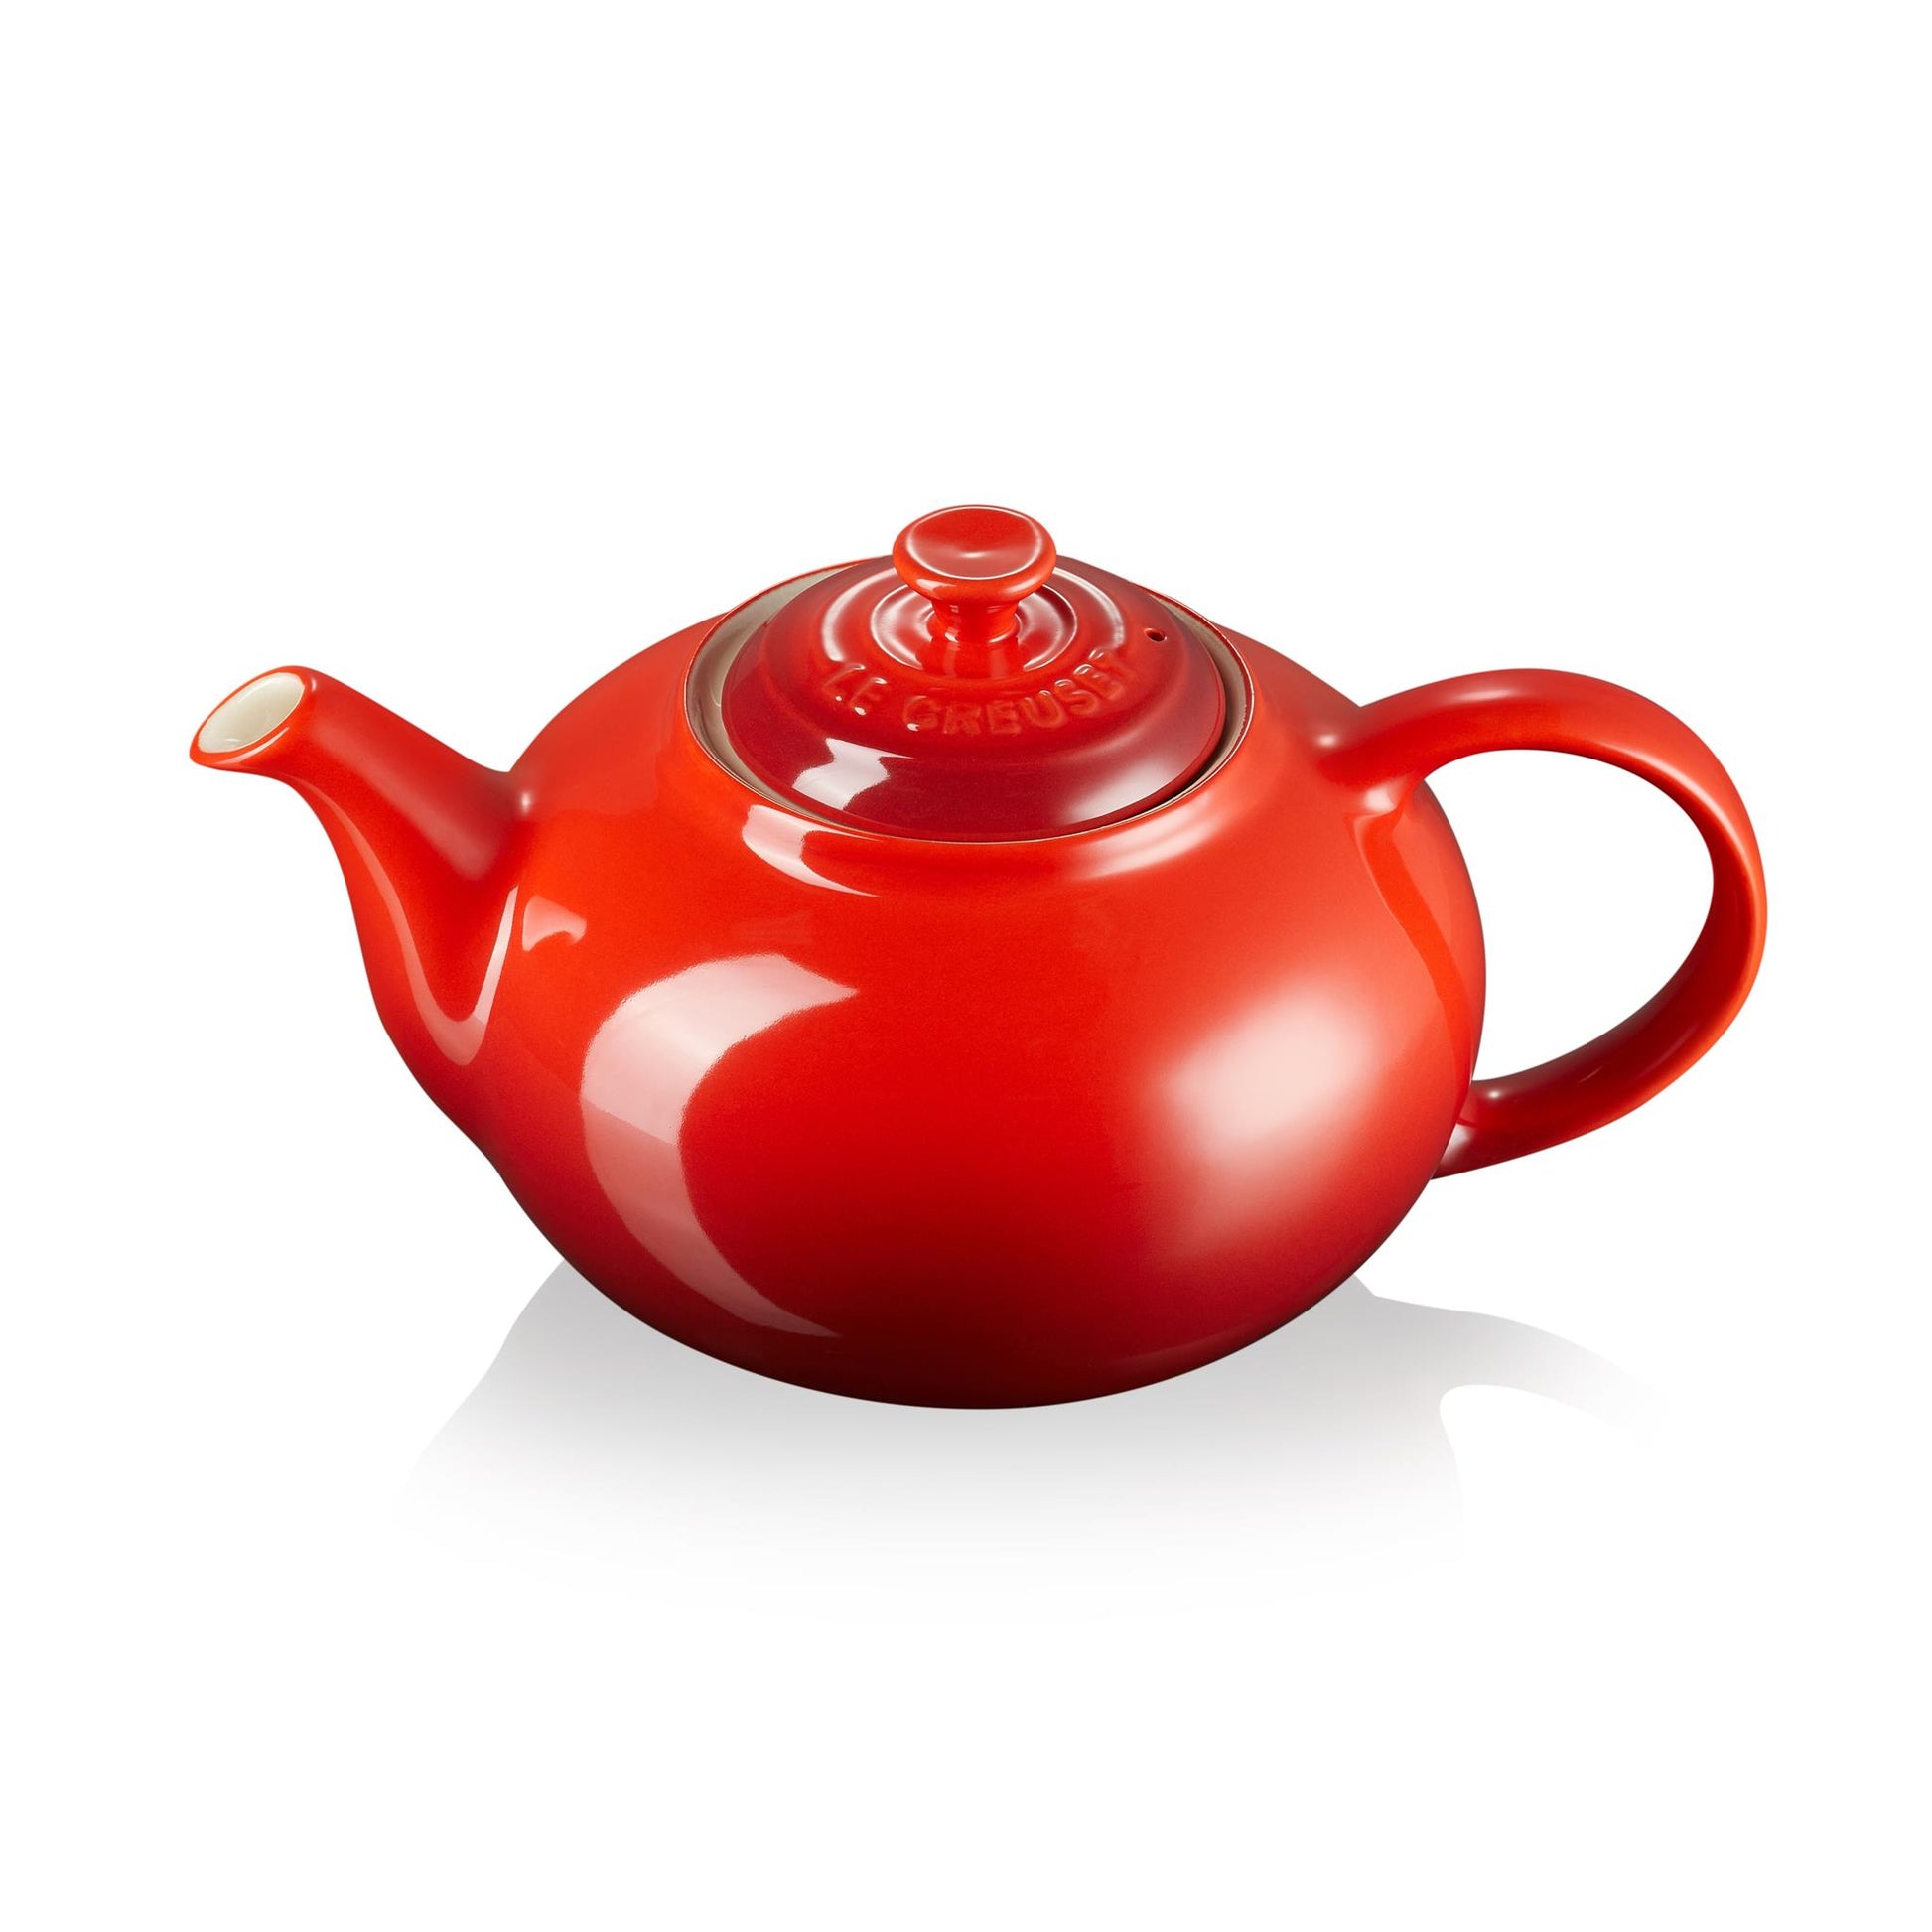 A classic red ombre tea pot with handle, lid and spout